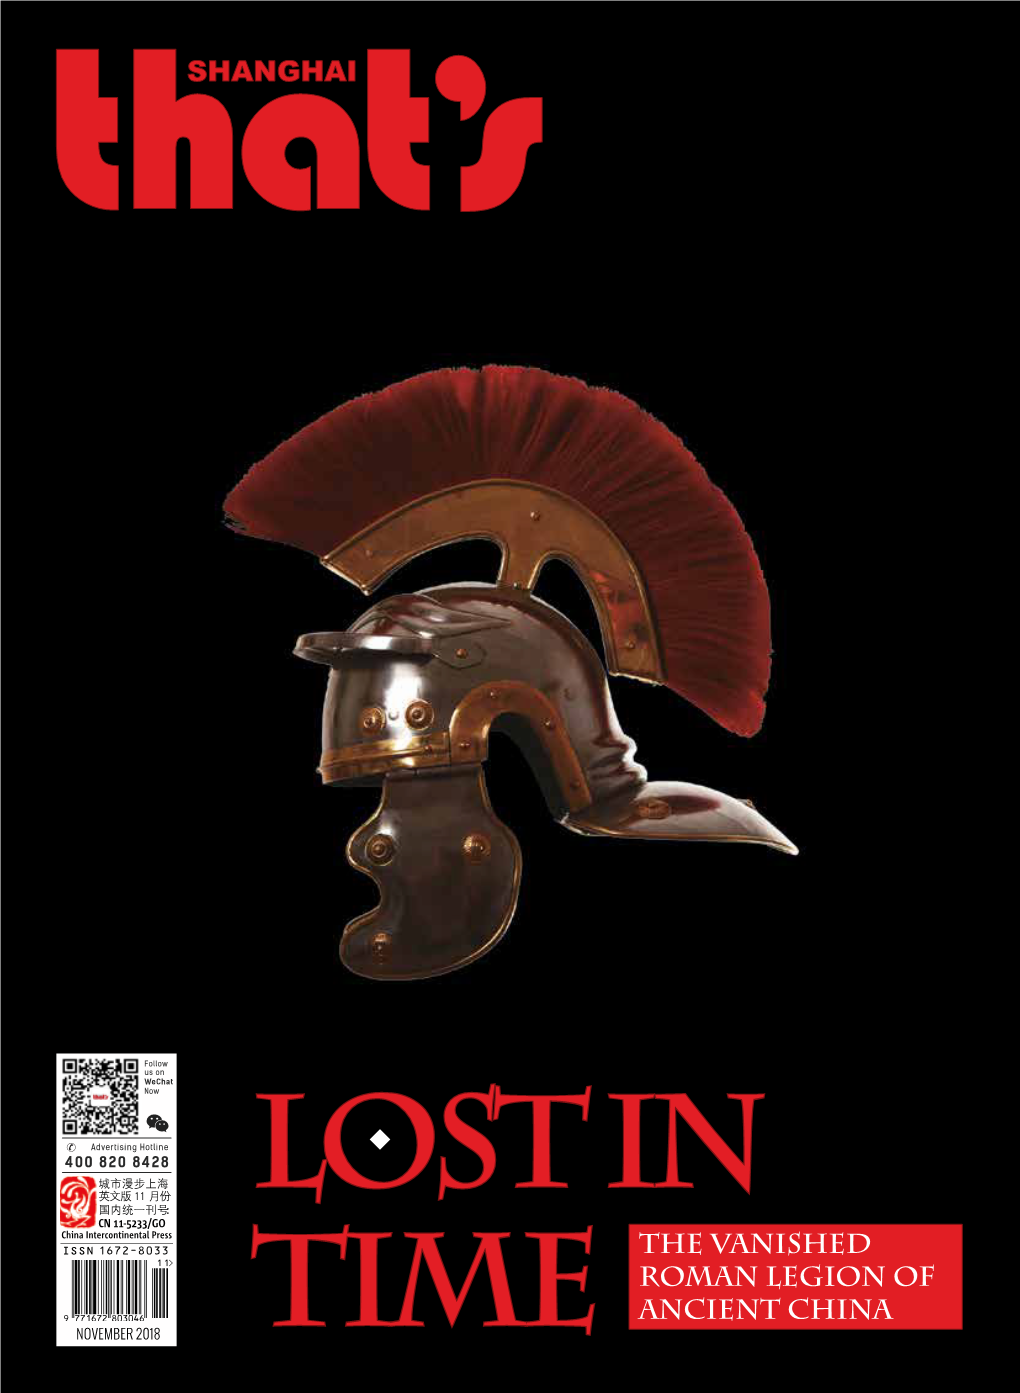 Time the Vanished Roman Legion Of